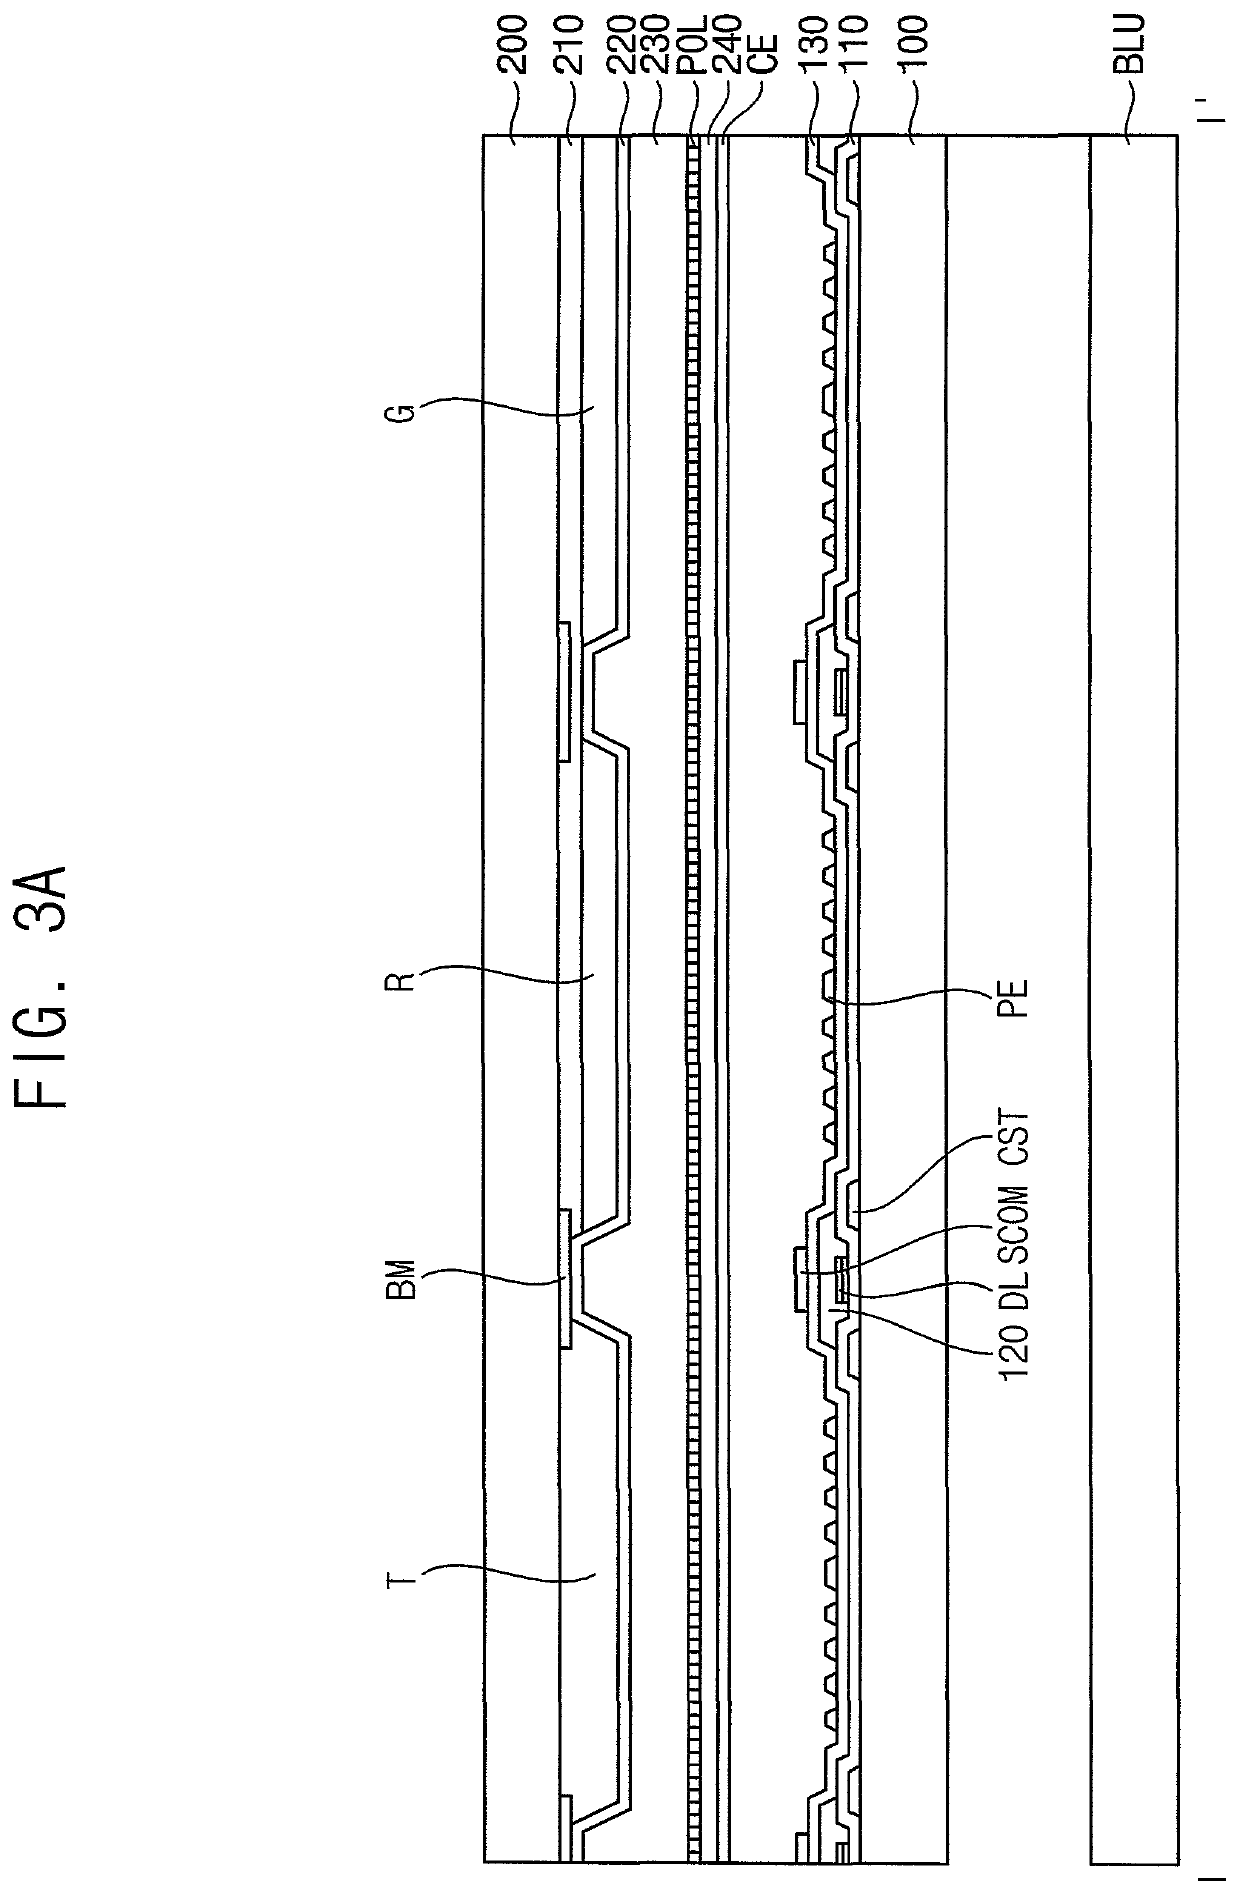 Display apparatus comprising a blue light blocking pattern overlapping a thin film transistor and a color conversion pattern comprising a quantum dot or phosphor